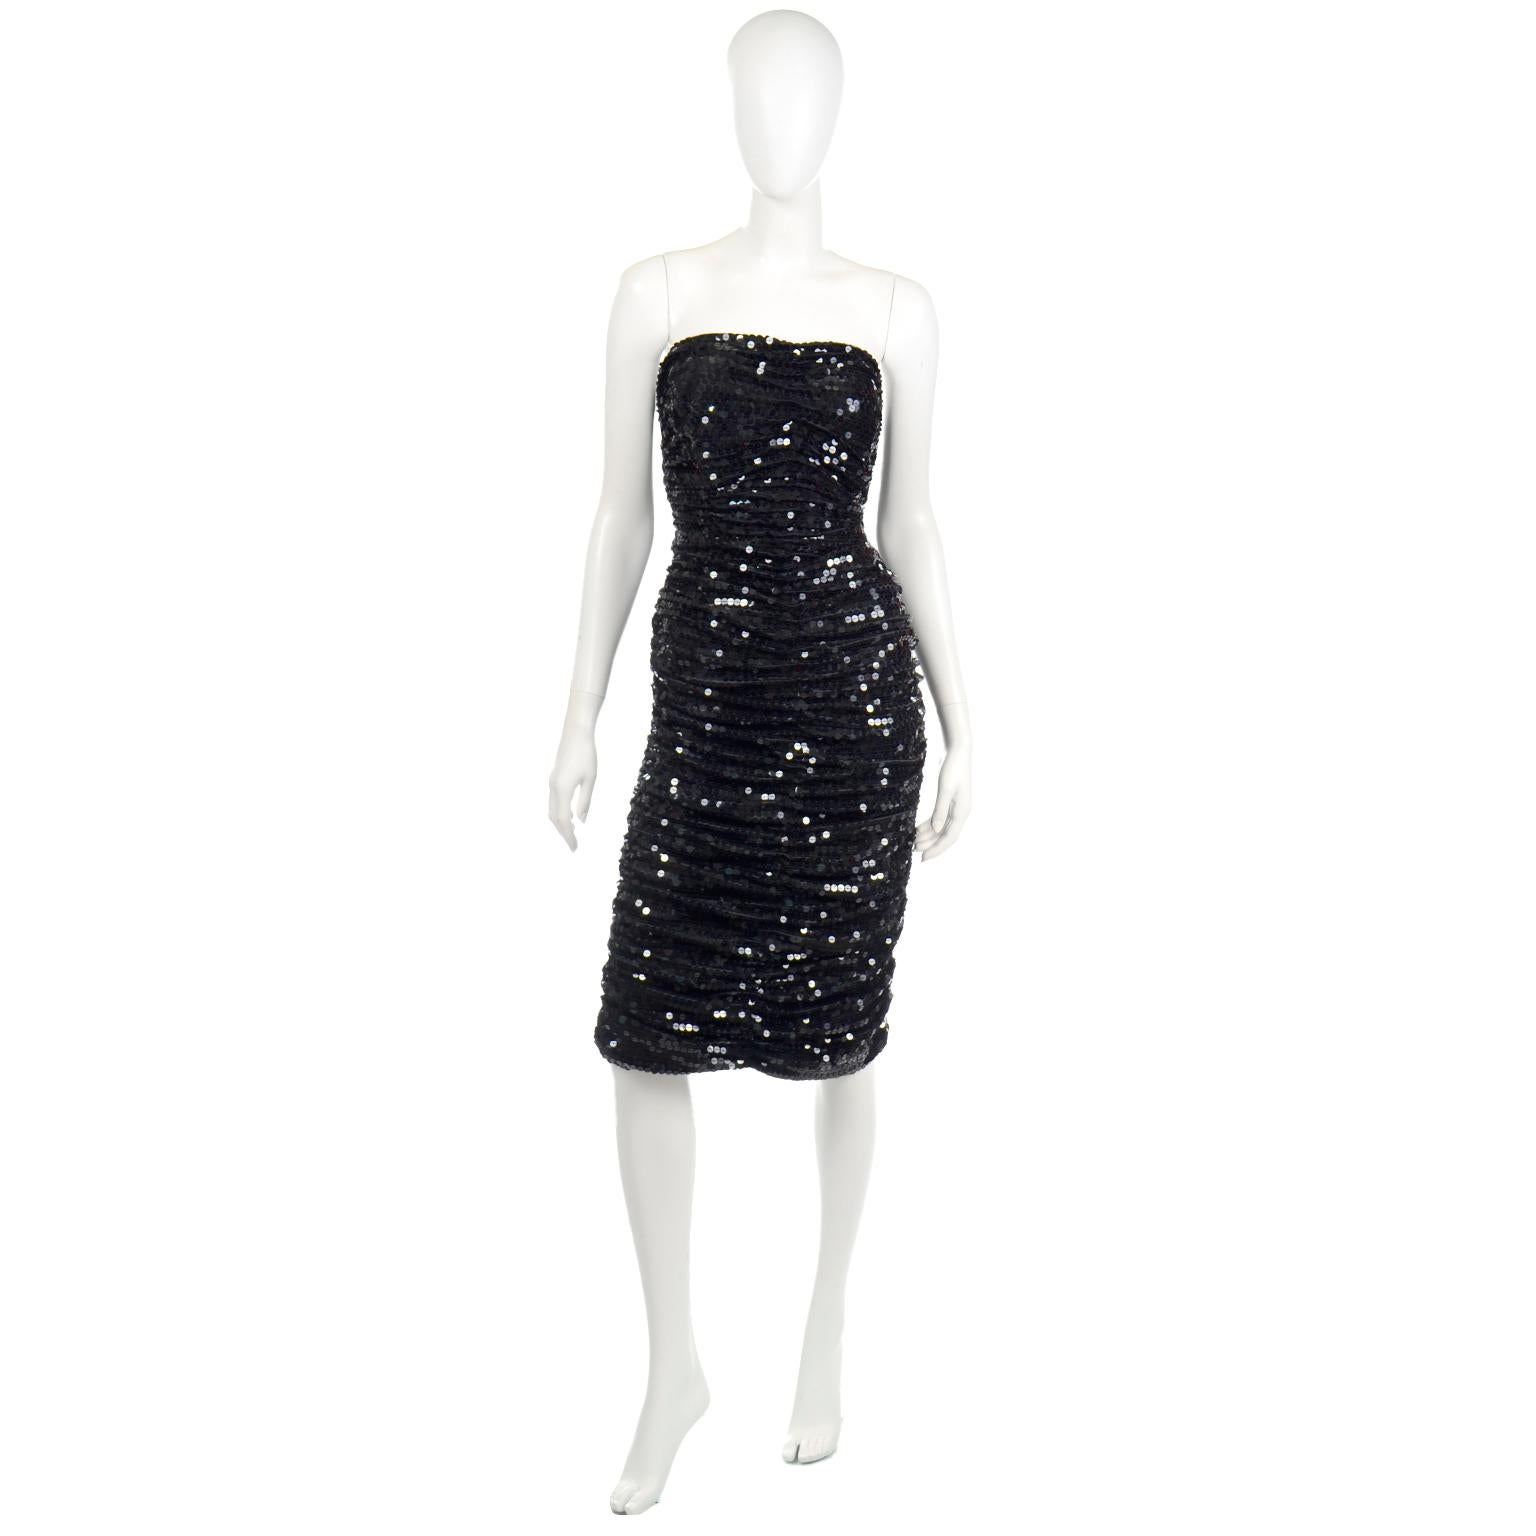 This is a shimmering vintage Oleg Cassini black sequin strapless evening dress with ruching throughout. This dress can take you all through the holidays and could be worn anytime during the year to a special evening event. There is 